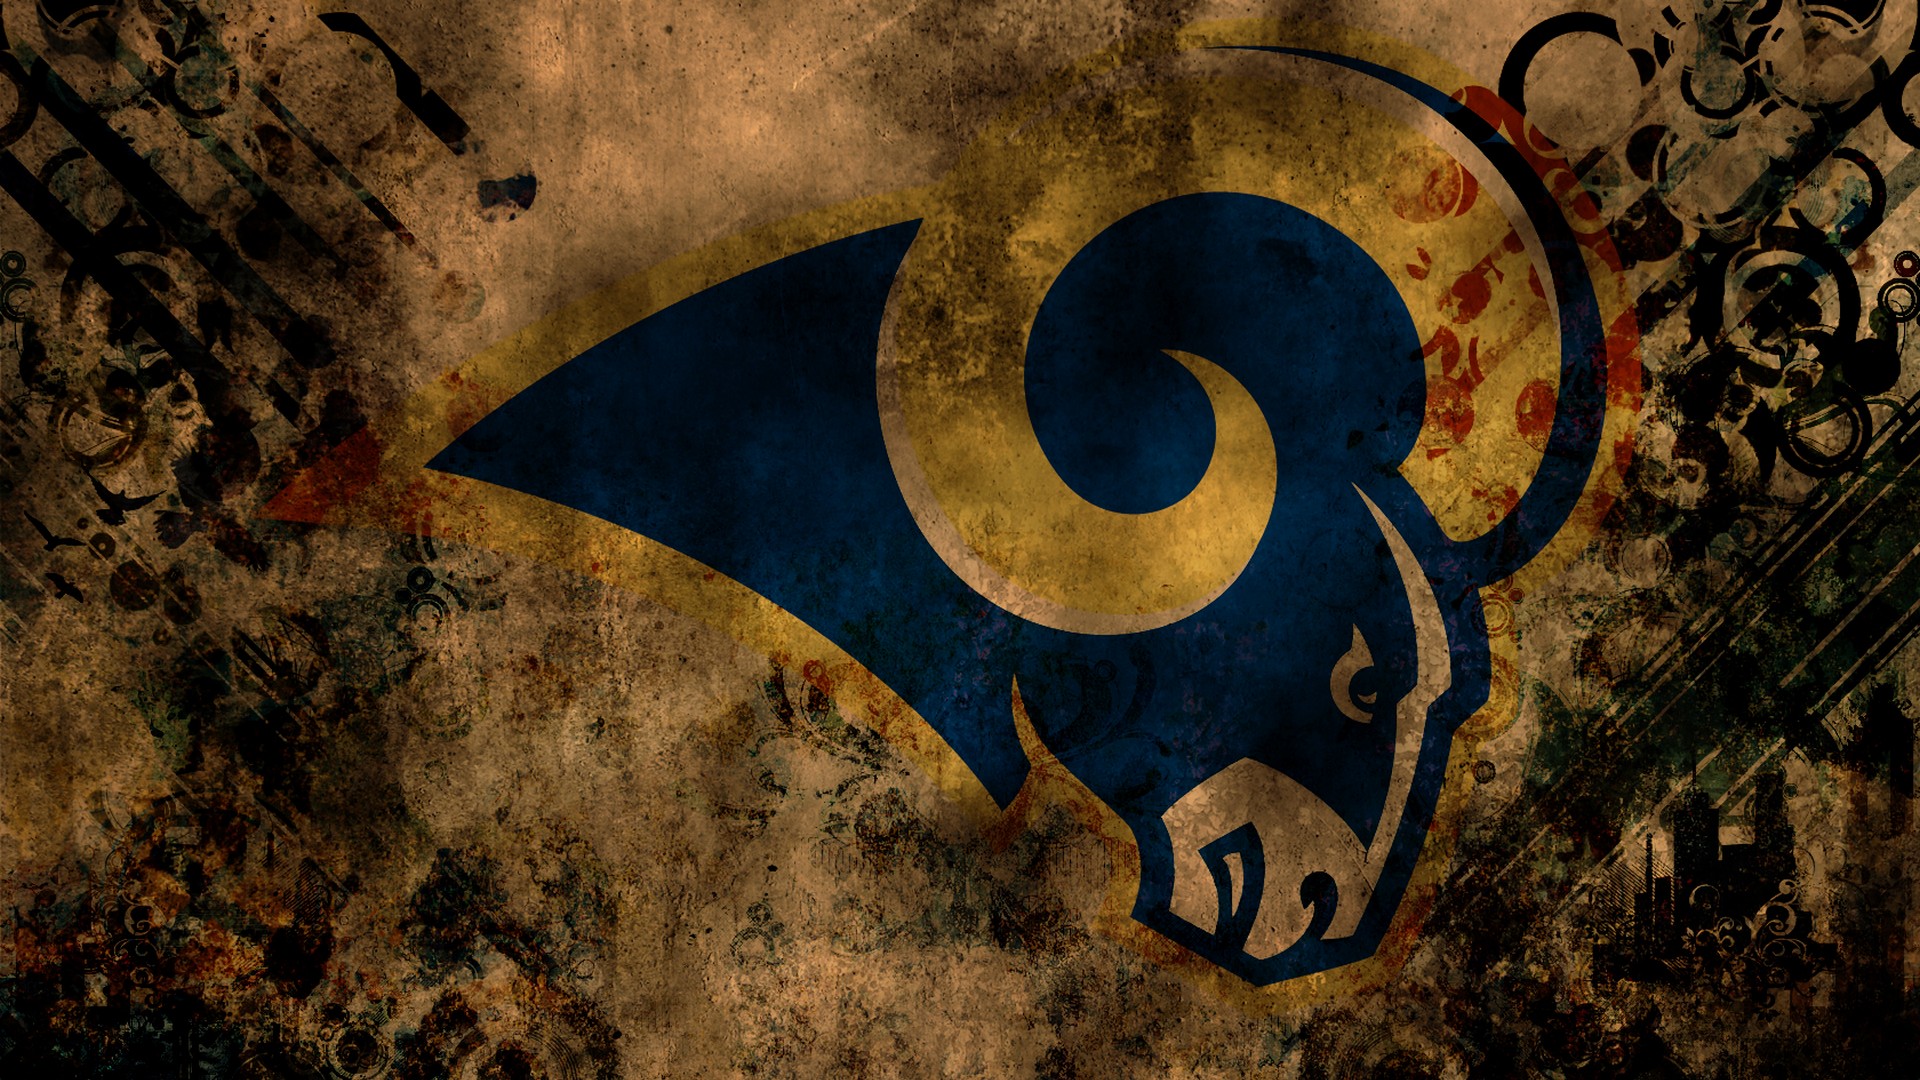 Los Angeles Rams Desktop Wallpaper With Resolution 1920X1080 pixel. You can make this wallpaper for your Mac or Windows Desktop Background, iPhone, Android or Tablet and another Smartphone device for free